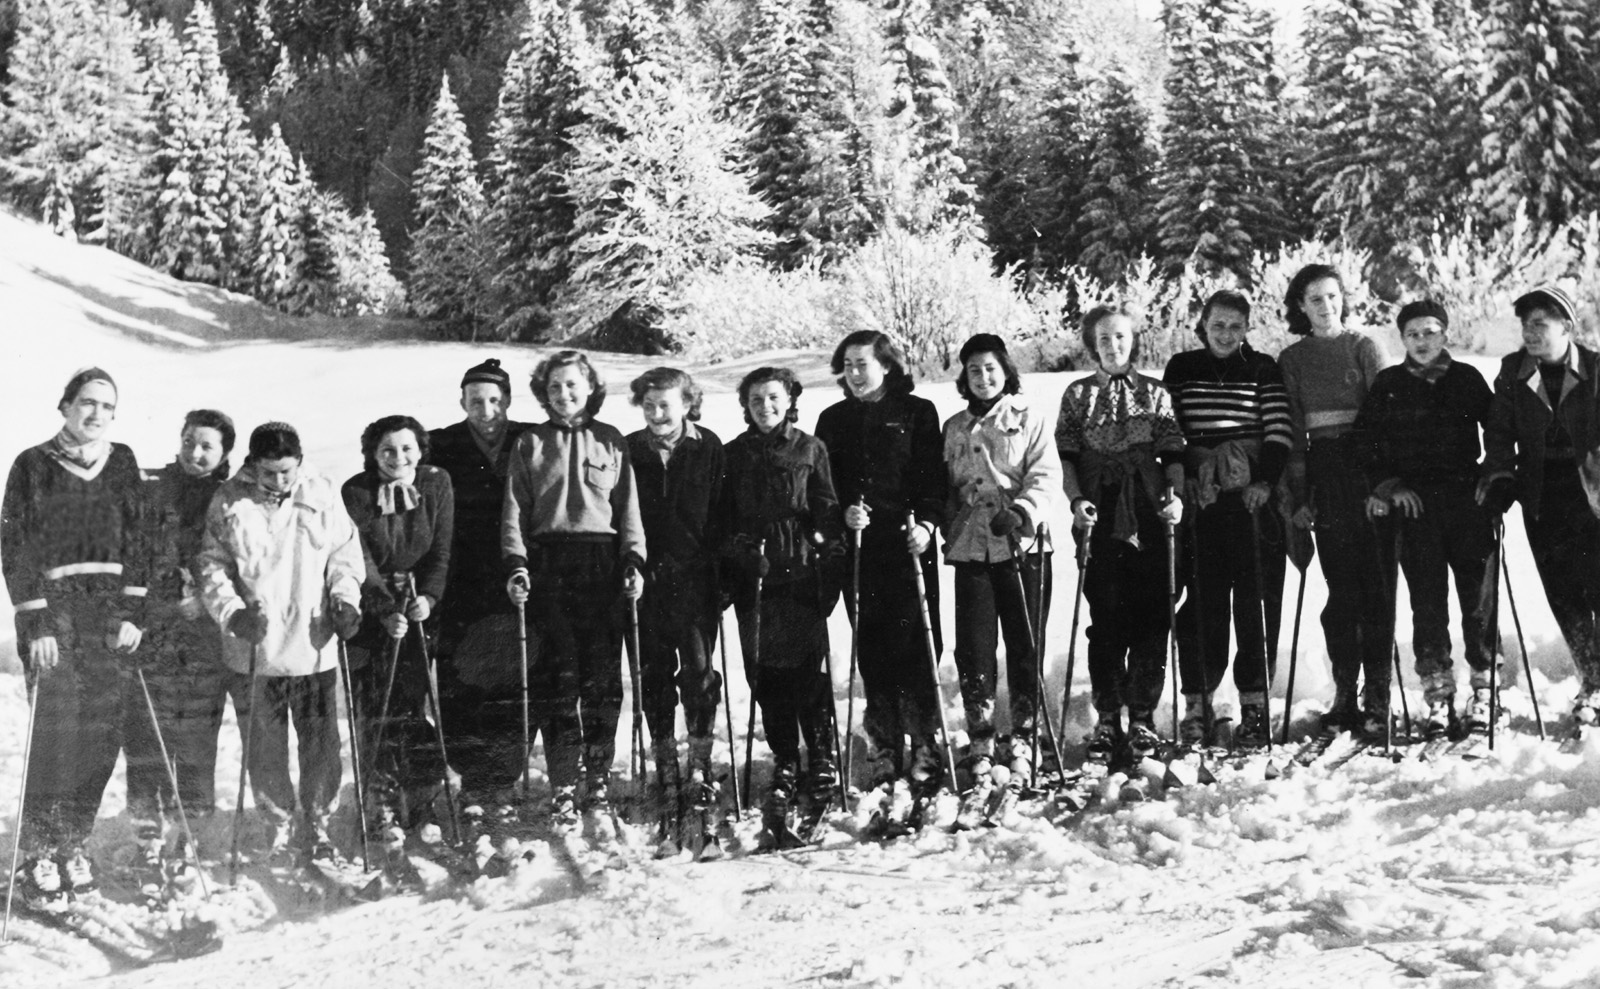 Danger and Intrigue in the Austrian Alps with the Classic Whodunnit 'Crossed Skis'